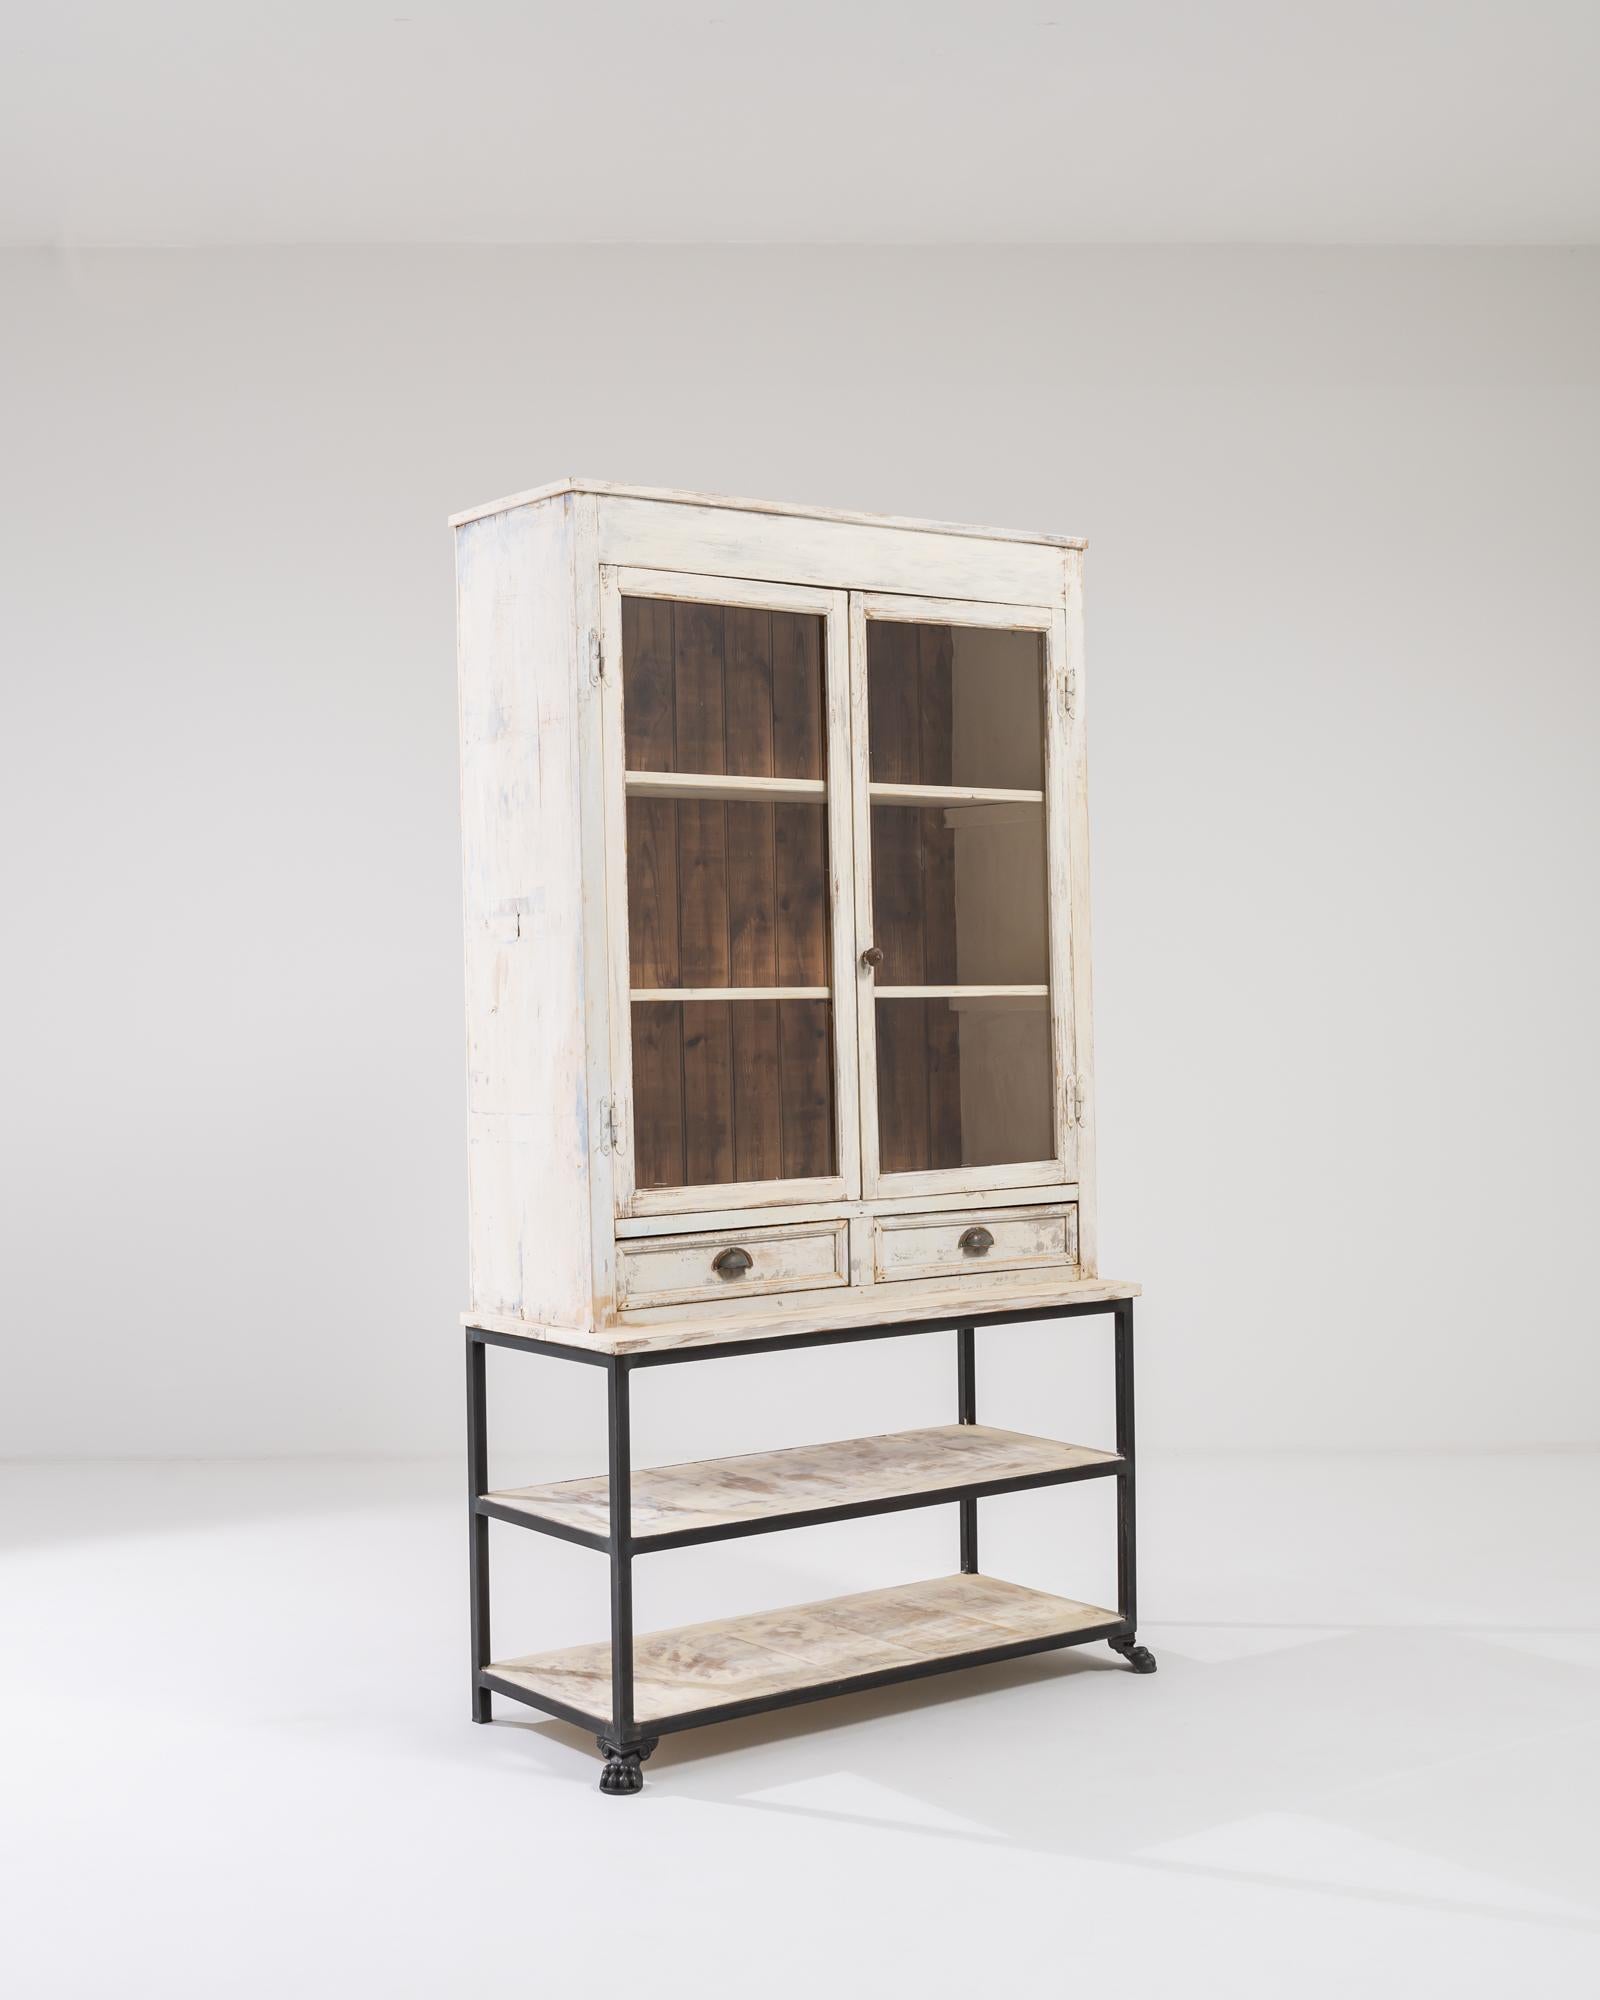 A wooden and metal vitrine from France, circa 1900. This vitrine is composed of two lower shelves, two drawers and two shelves which rest inside glass paneled doors. This display cabinet’s white painted exterior has worn away just so slightly with